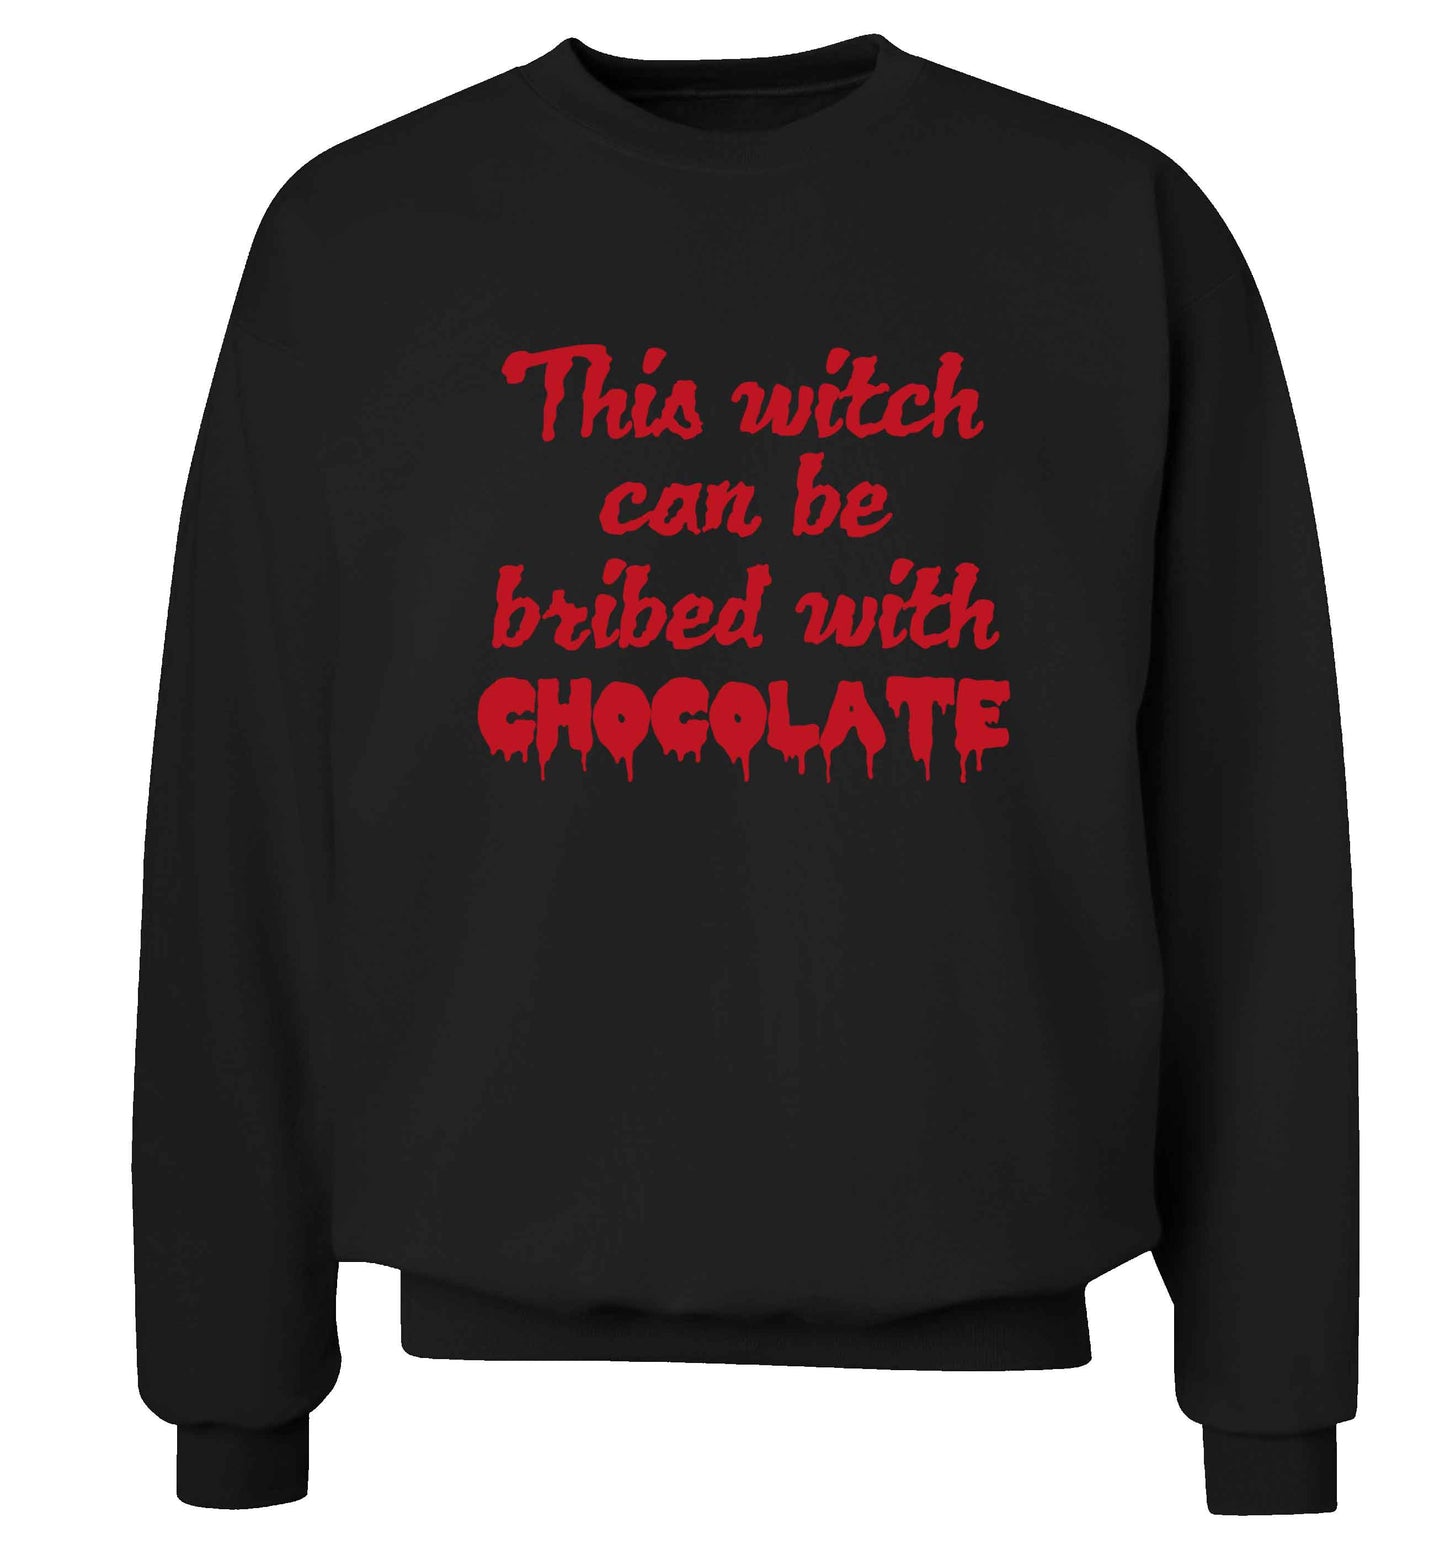 This witch can be bribed with chocolate adult's unisex black sweater 2XL